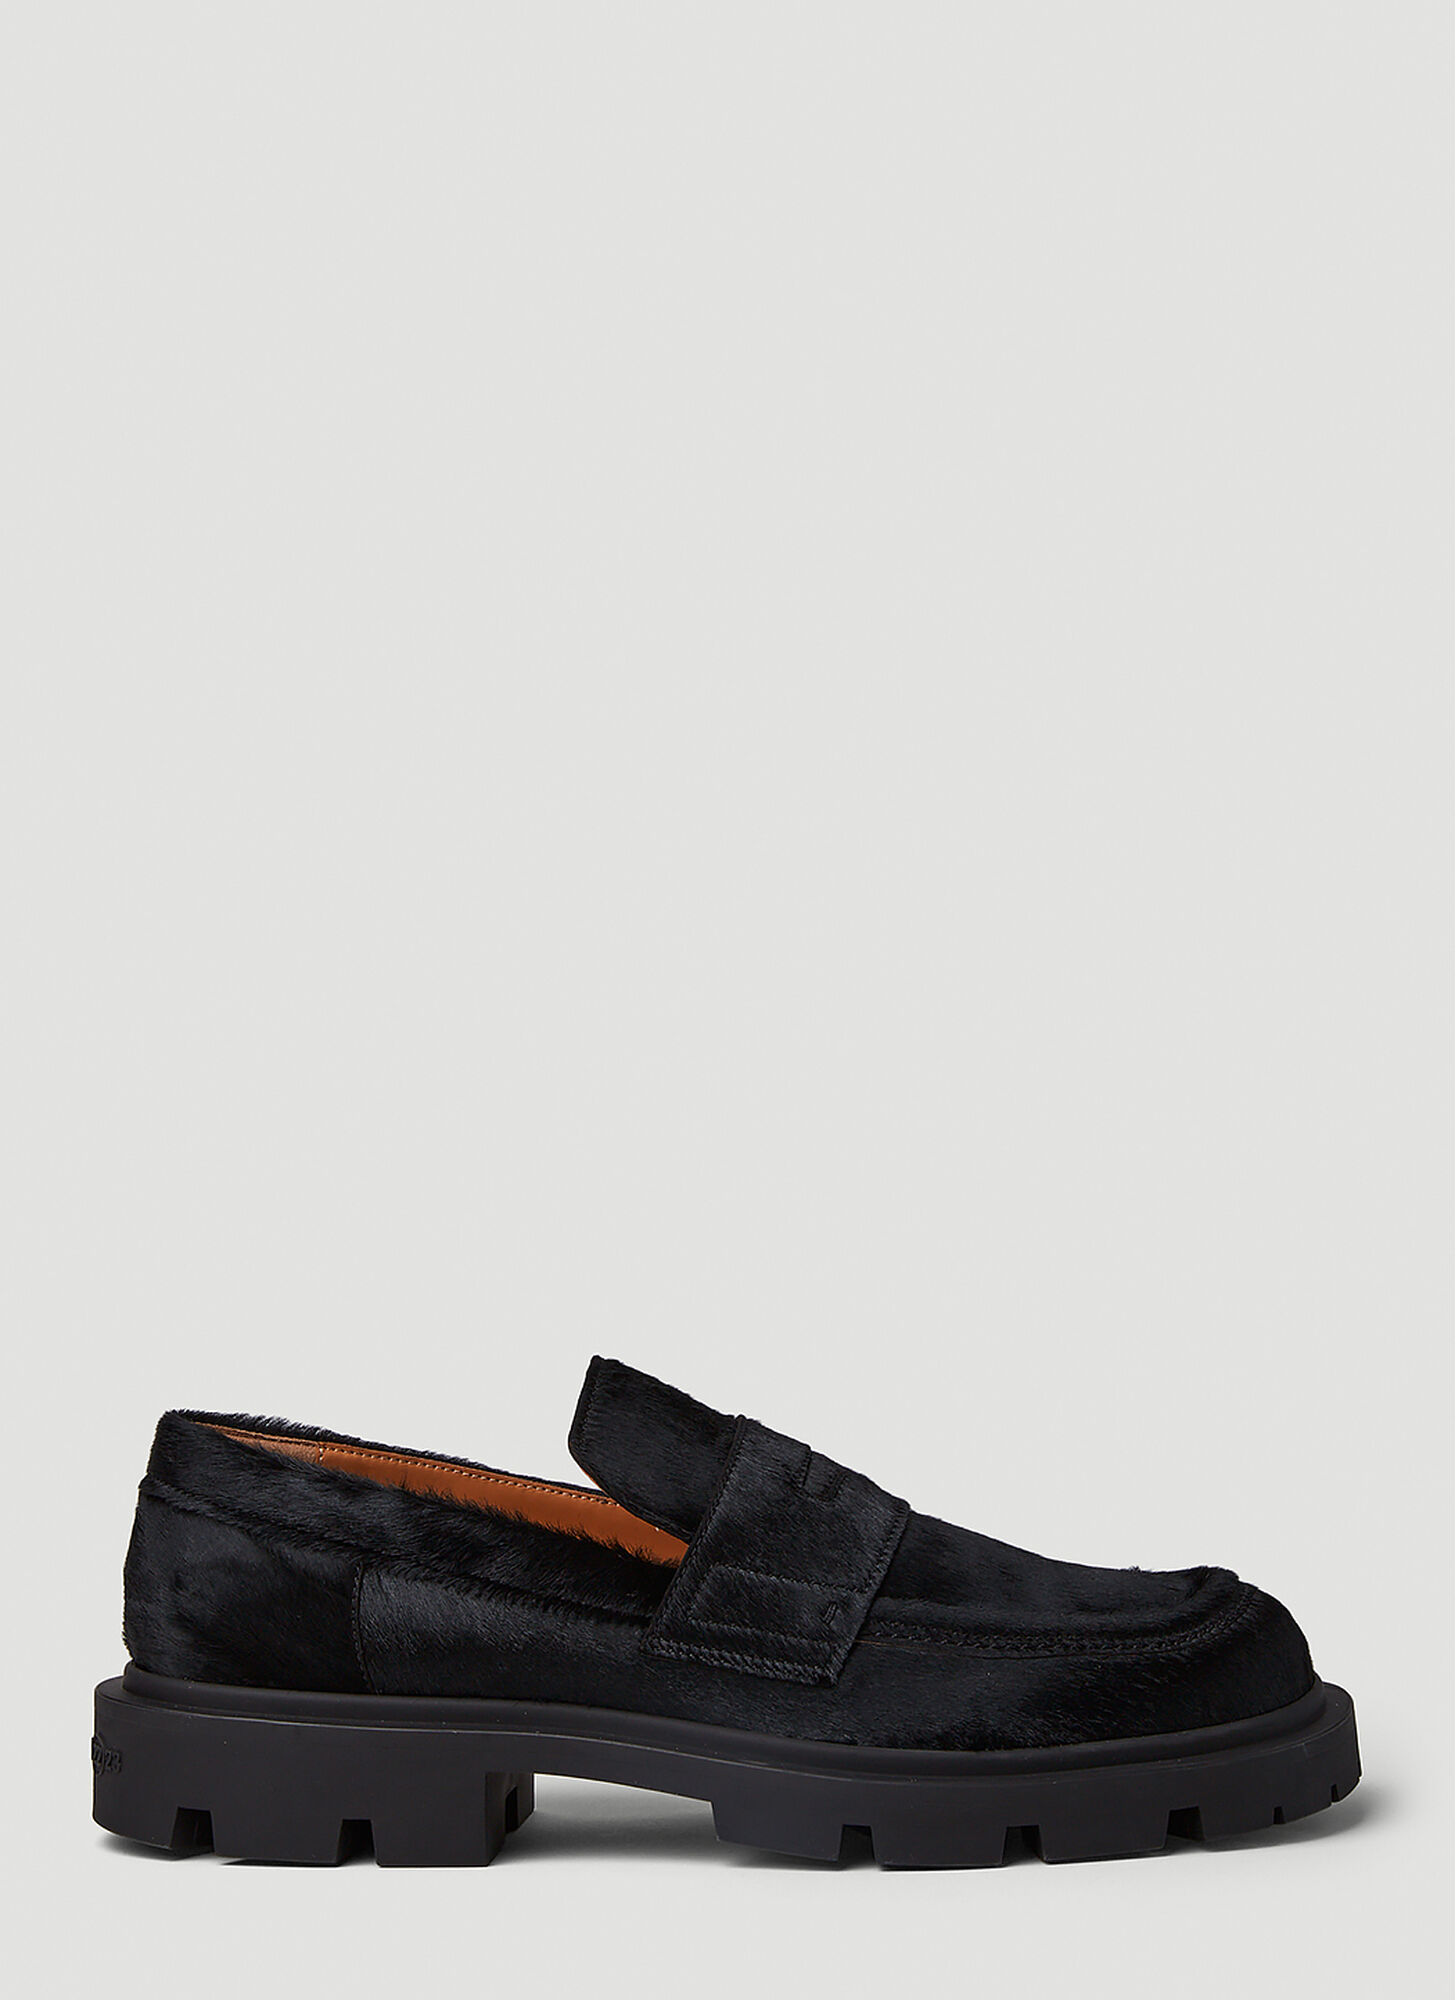 Maison Margiela Hairy Penny Loafers In Black